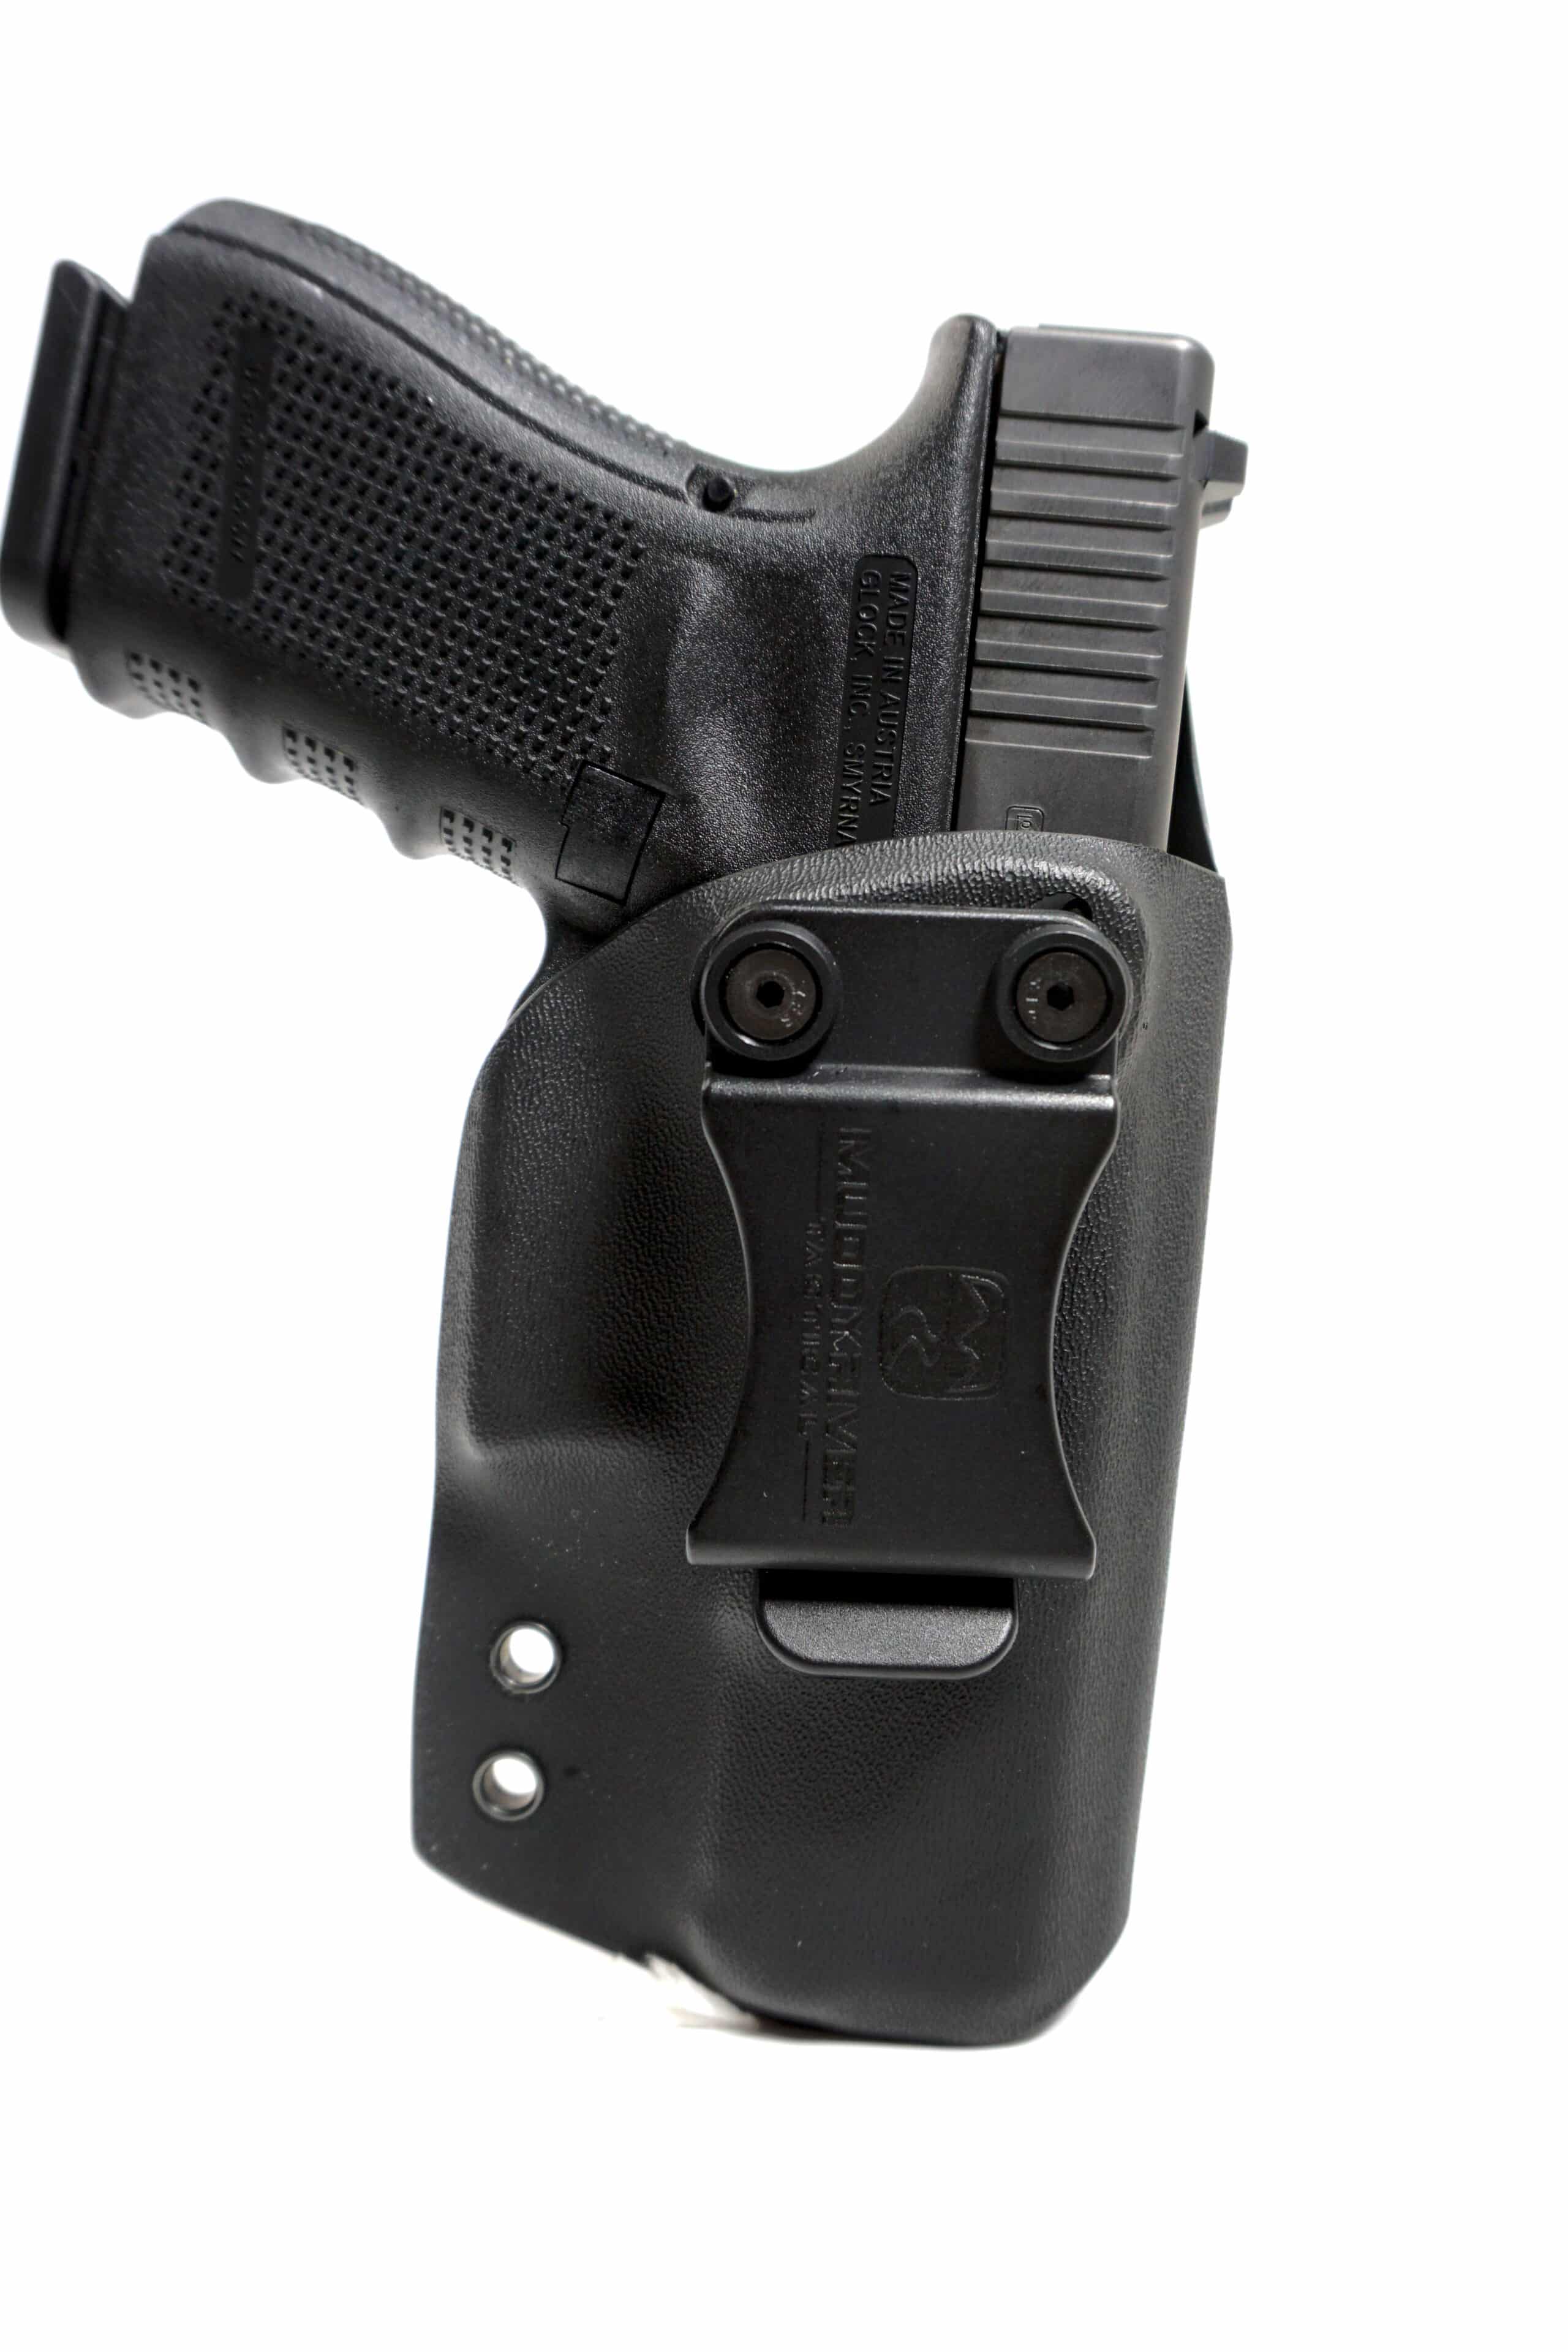 Details about  / Leather Kydex Paddle Gun Holster LH RH For Kel Tec P11